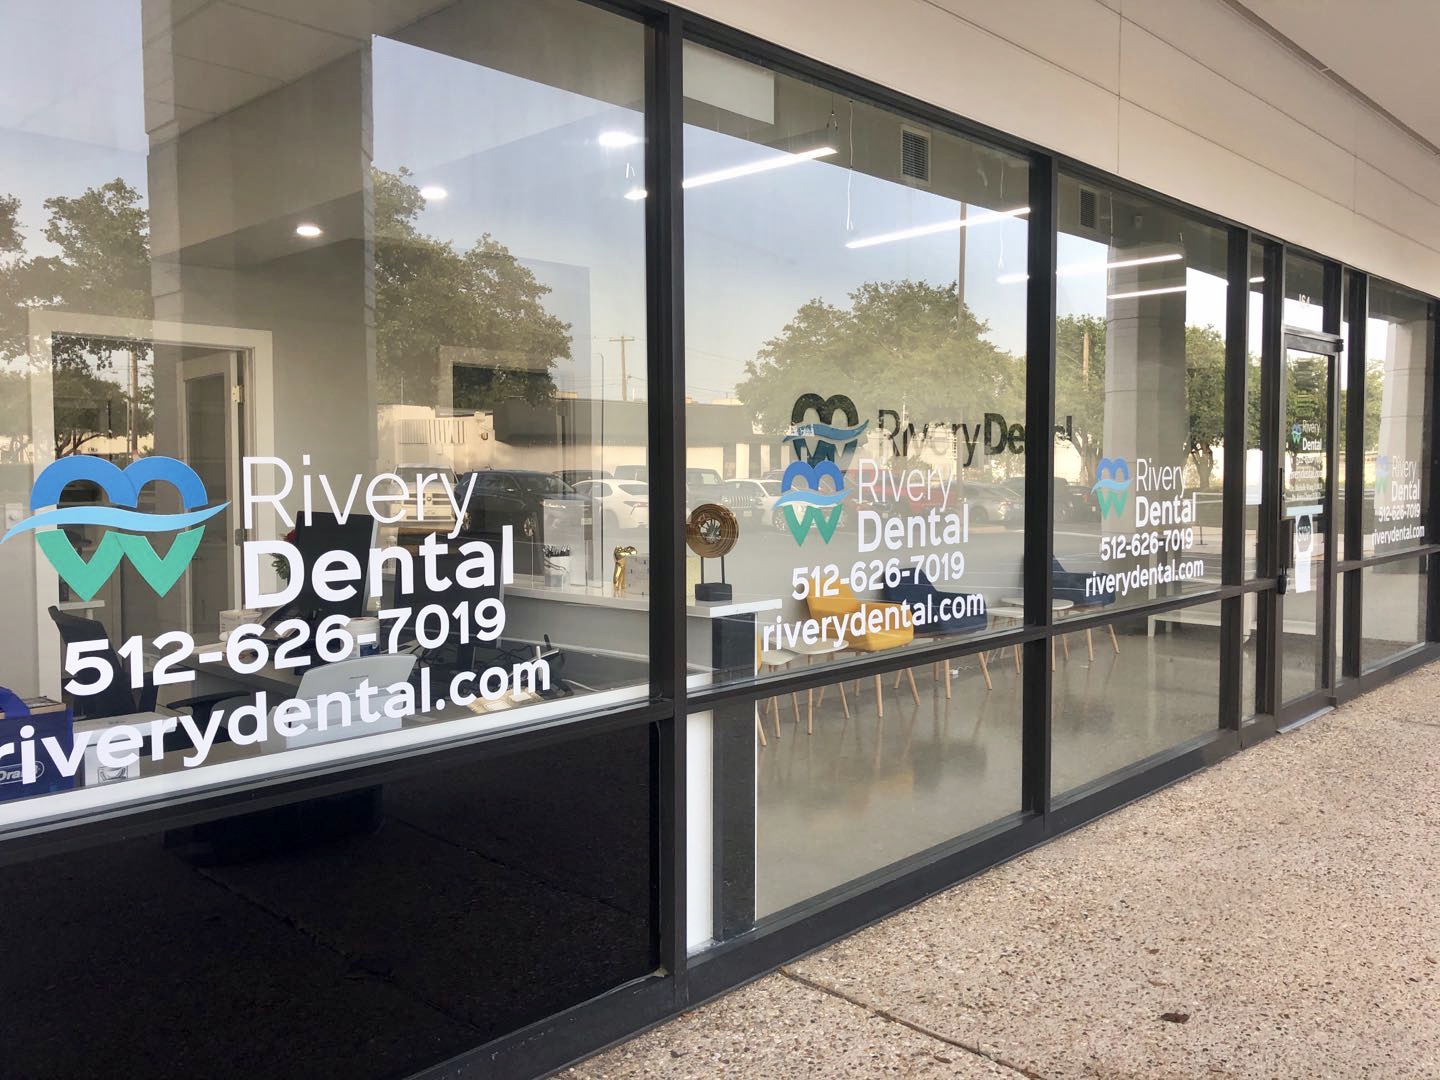 Affordable high-quality dentures in Georgetown - Rivery Dental